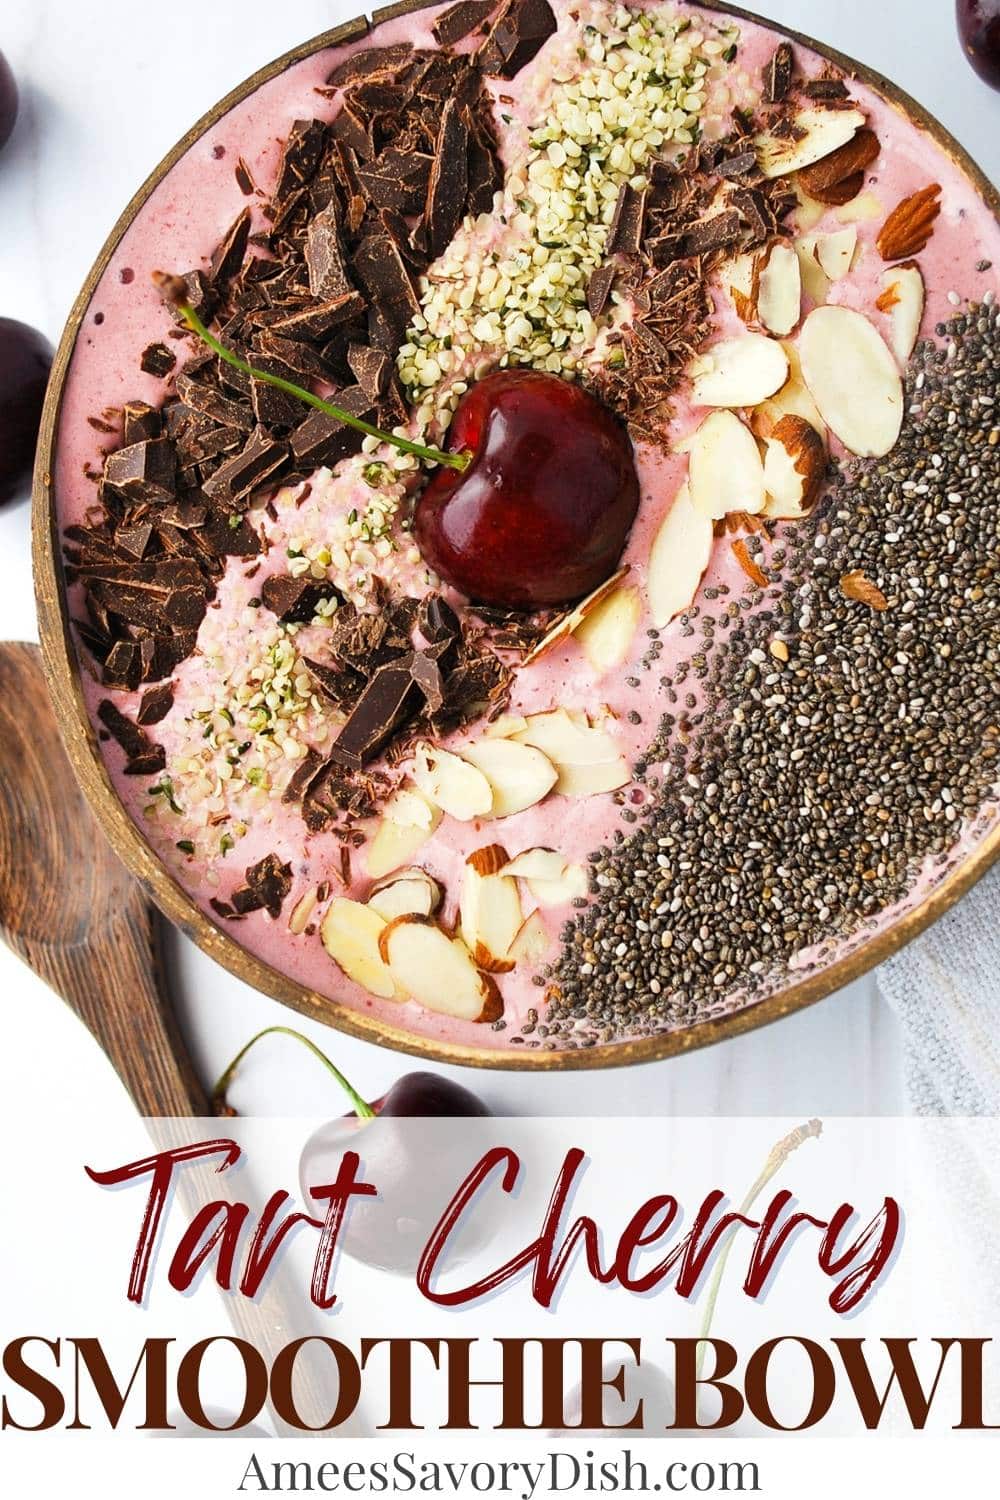 This flavorful protein-packed Cherry Smoothie Bowl makes the perfect easy breakfast, snack, or post-workout meal! It's easy to throw together and combines quality protein with nutrient-dense sources of carbohydrates. via @Ameessavorydish